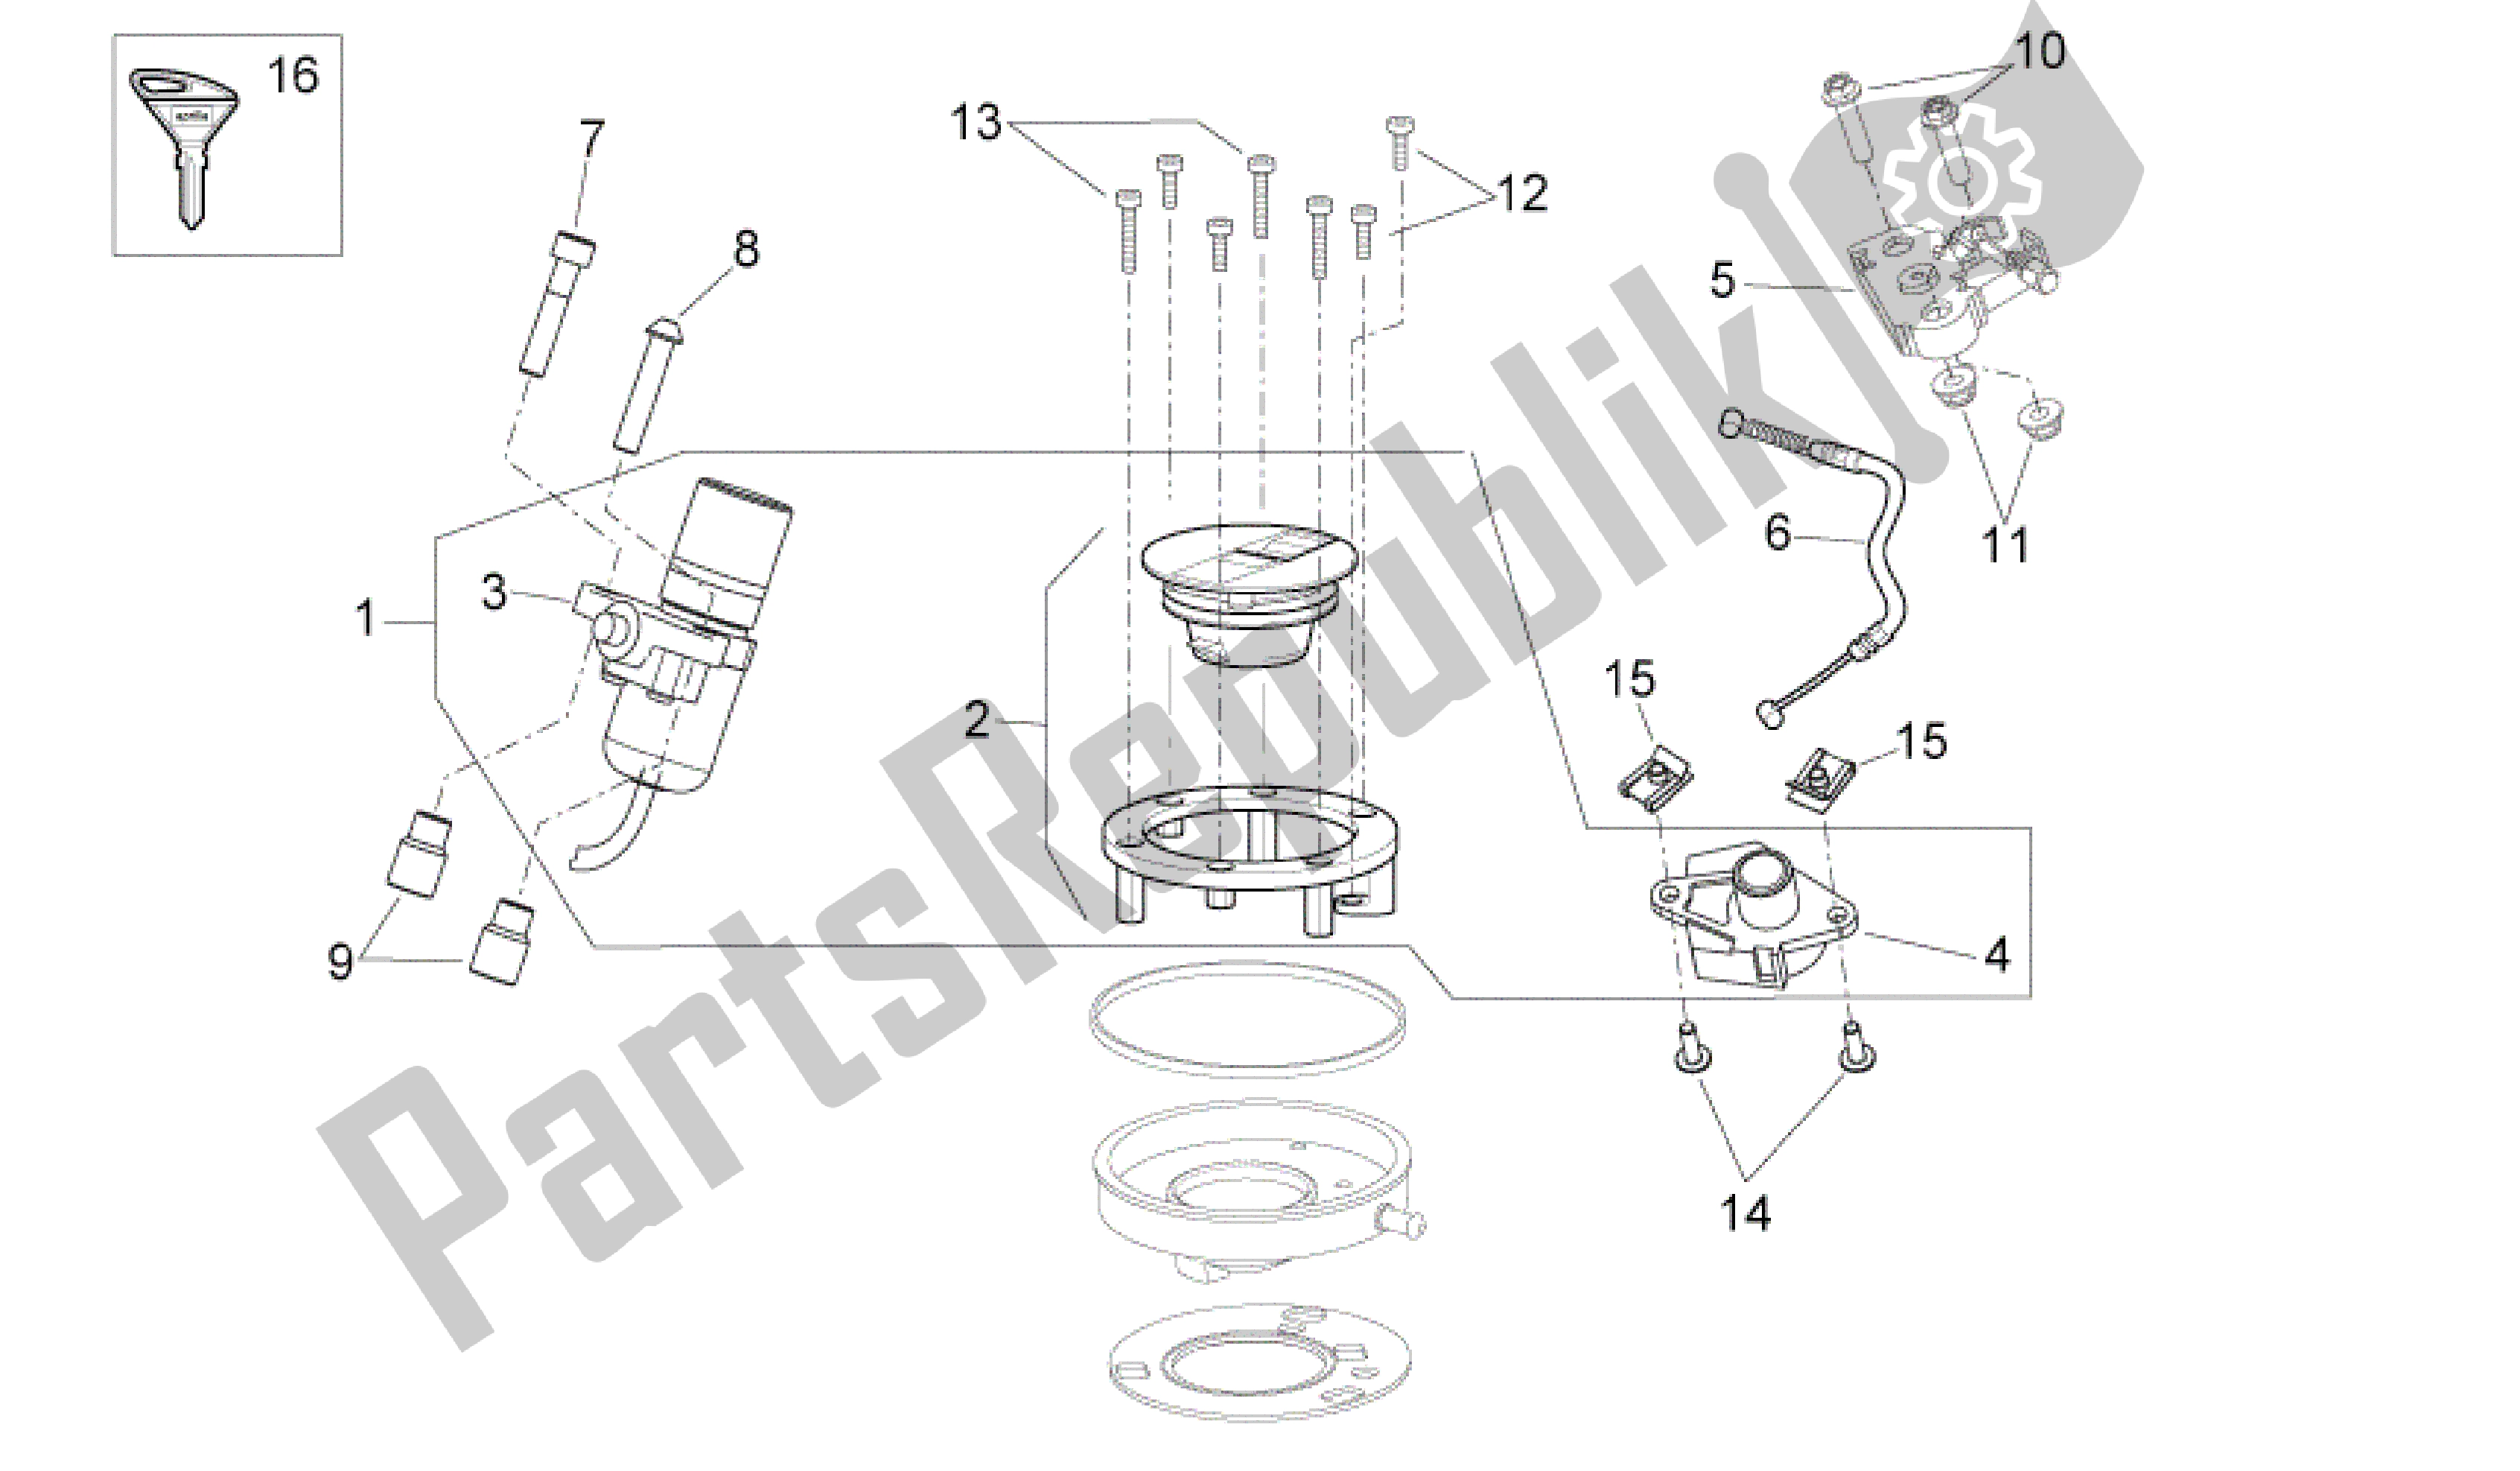 All parts for the Lock Hardware Kit of the Aprilia Shiver 750 2010 - 2013